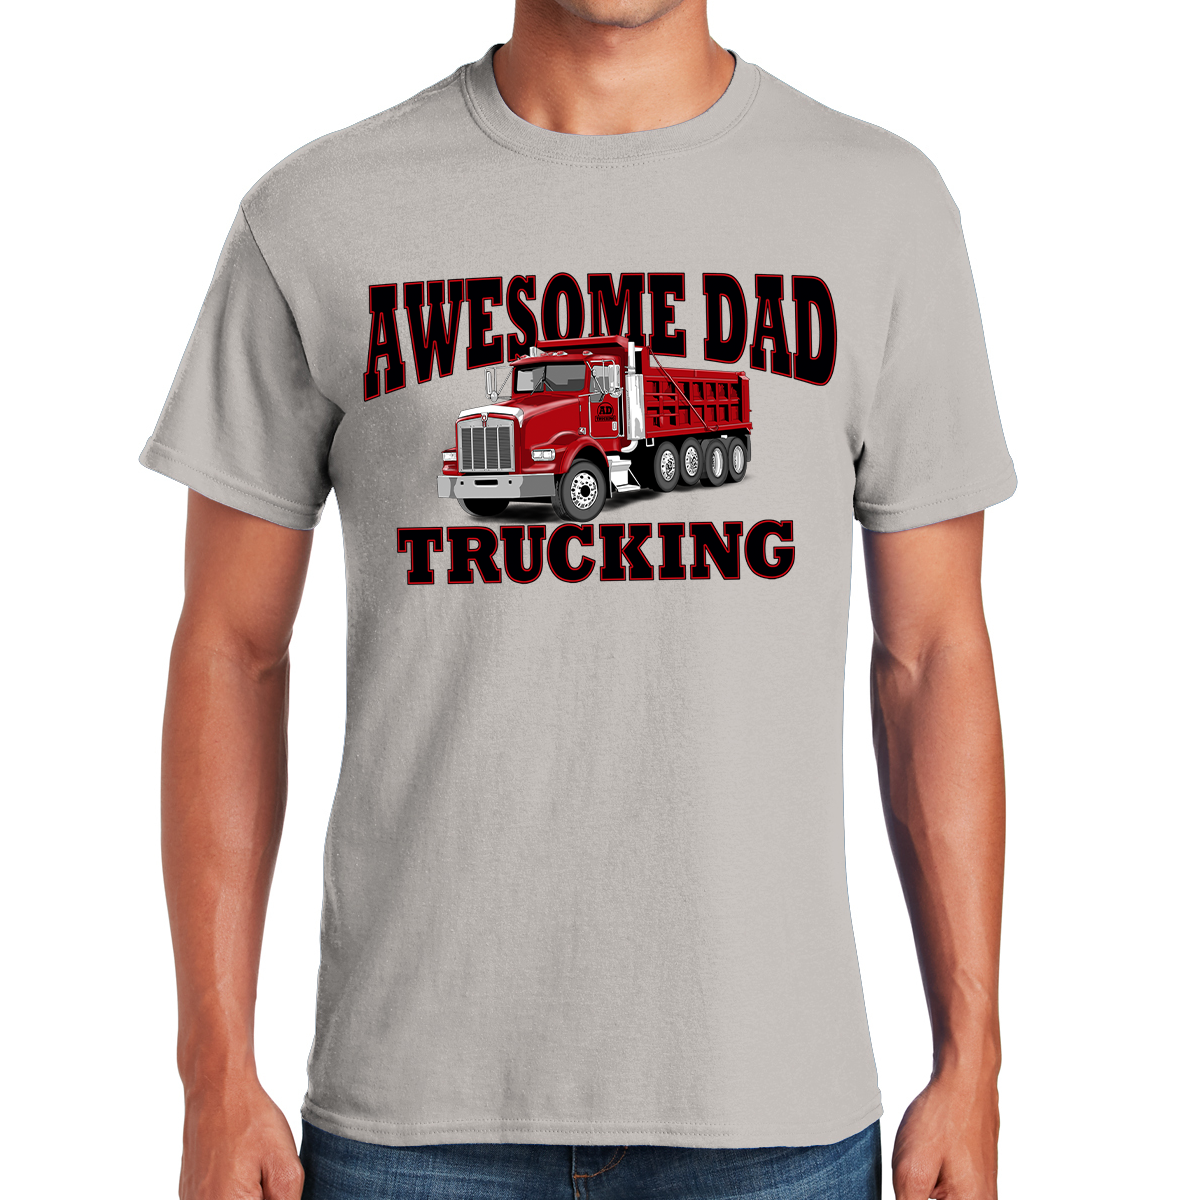 Awesome Dad Dump Truck Hauling Love And Fun In Fatherhood Gift For Dads T-shirt